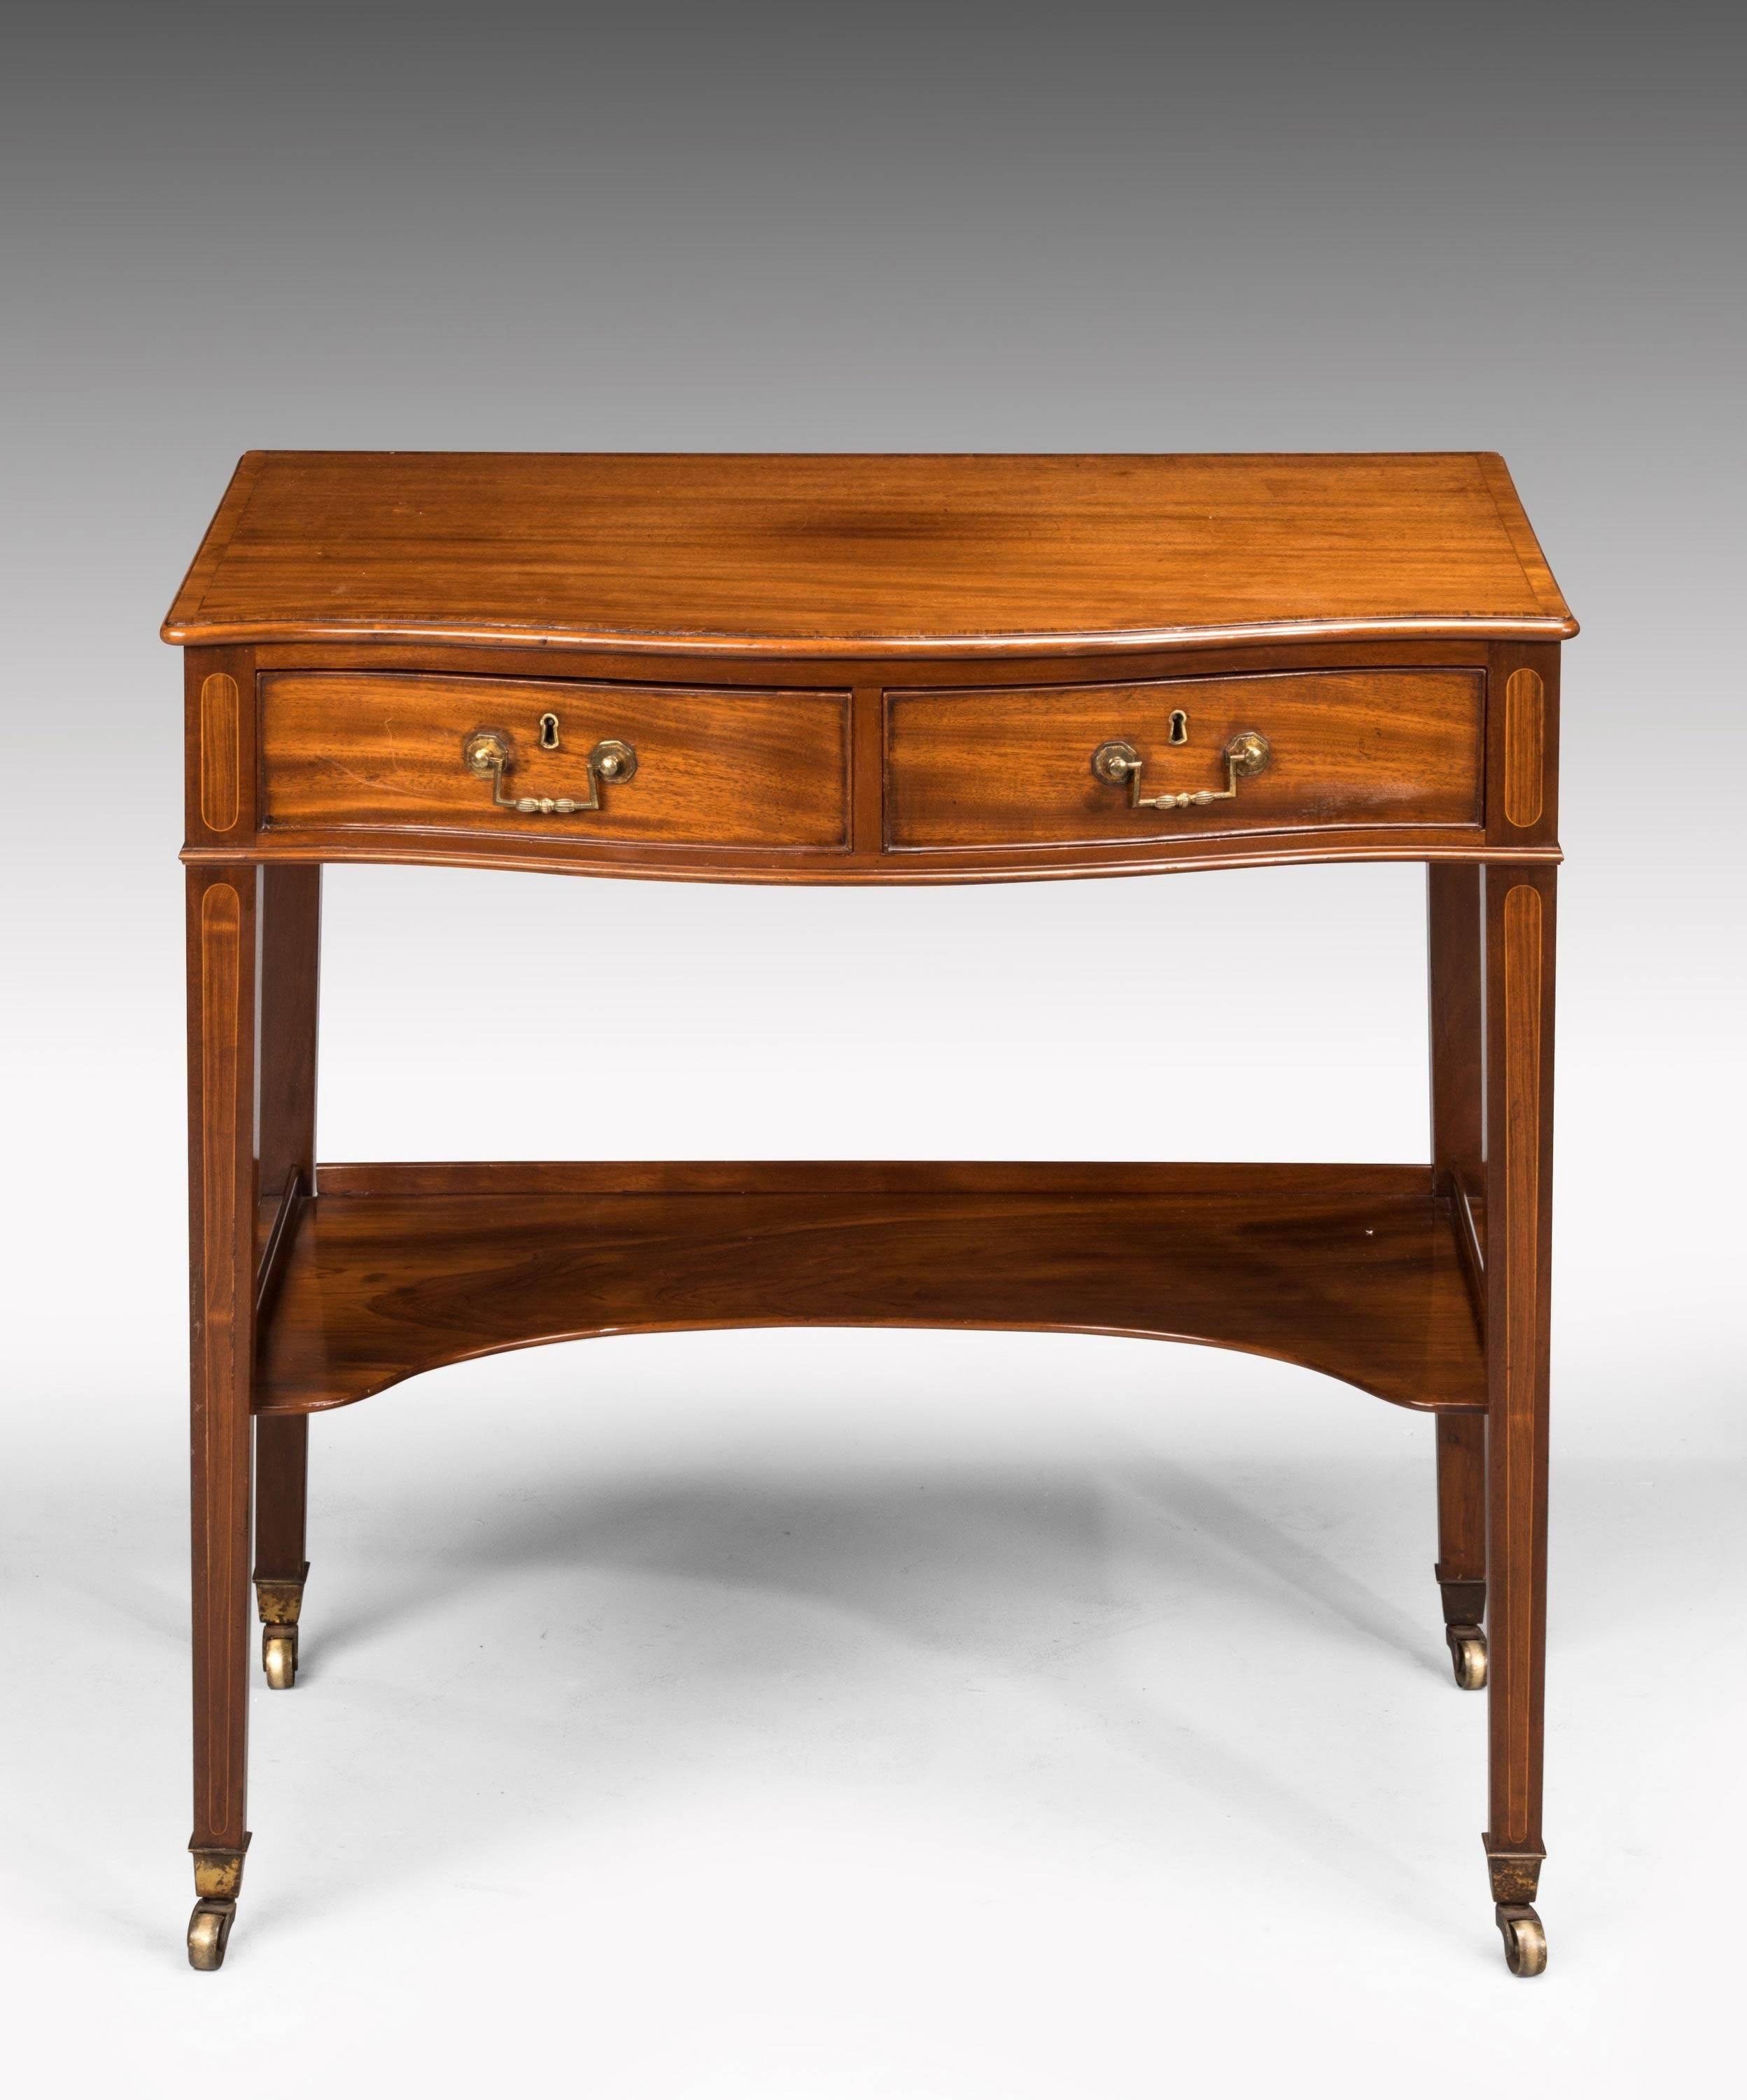 An elegant and well-made George III period mahogany side table, of very small proportions. The serpentine front incorporating two drawers, with very good original period square section handles. The underneath with a shaped tray. Square tapering